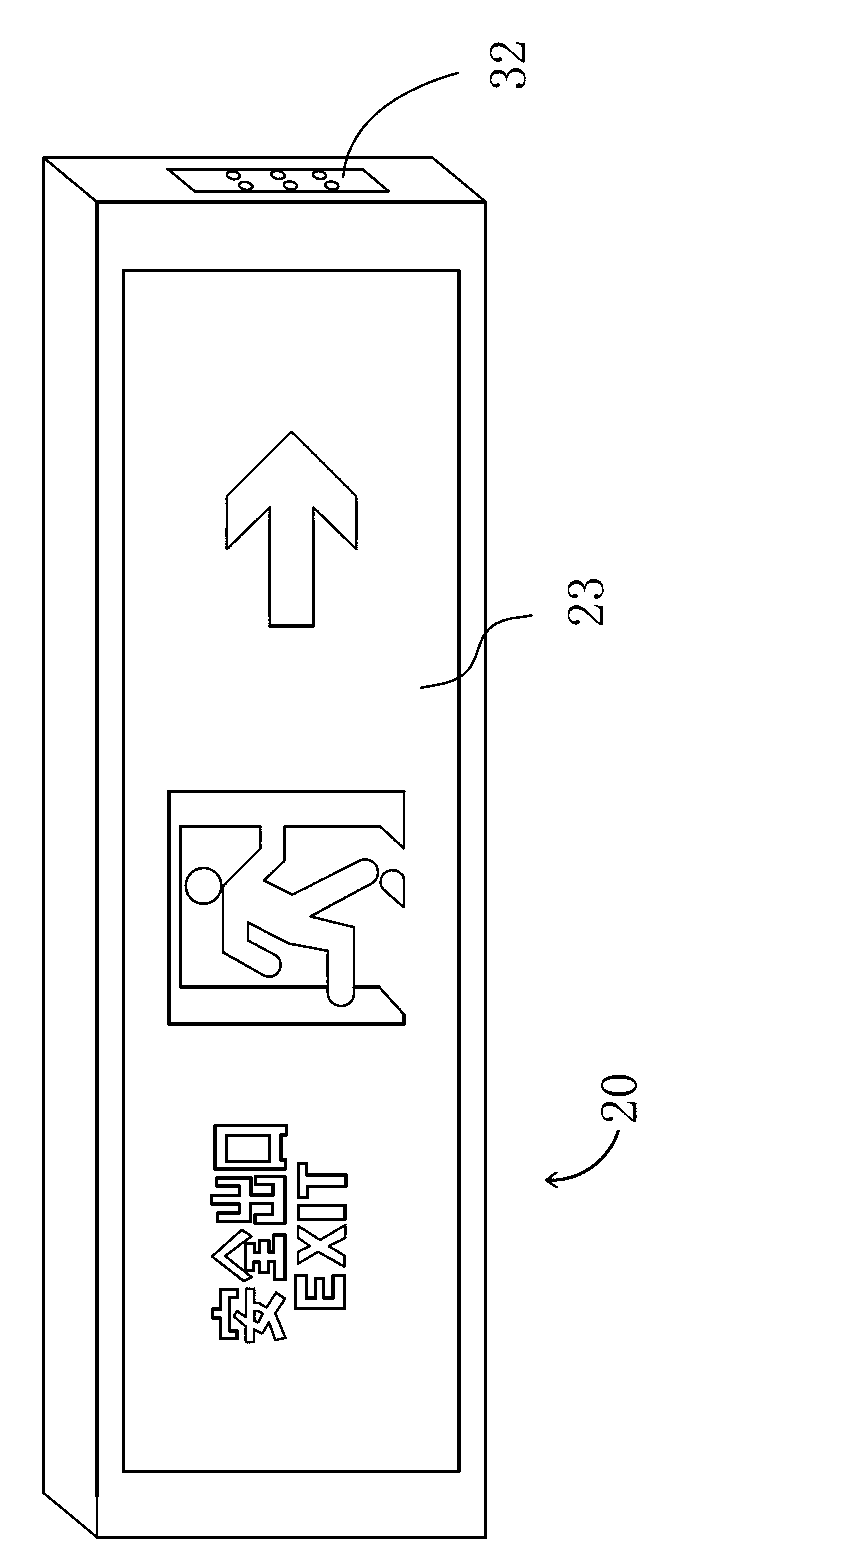 Emergency evacuation guide device with emergency lighting function